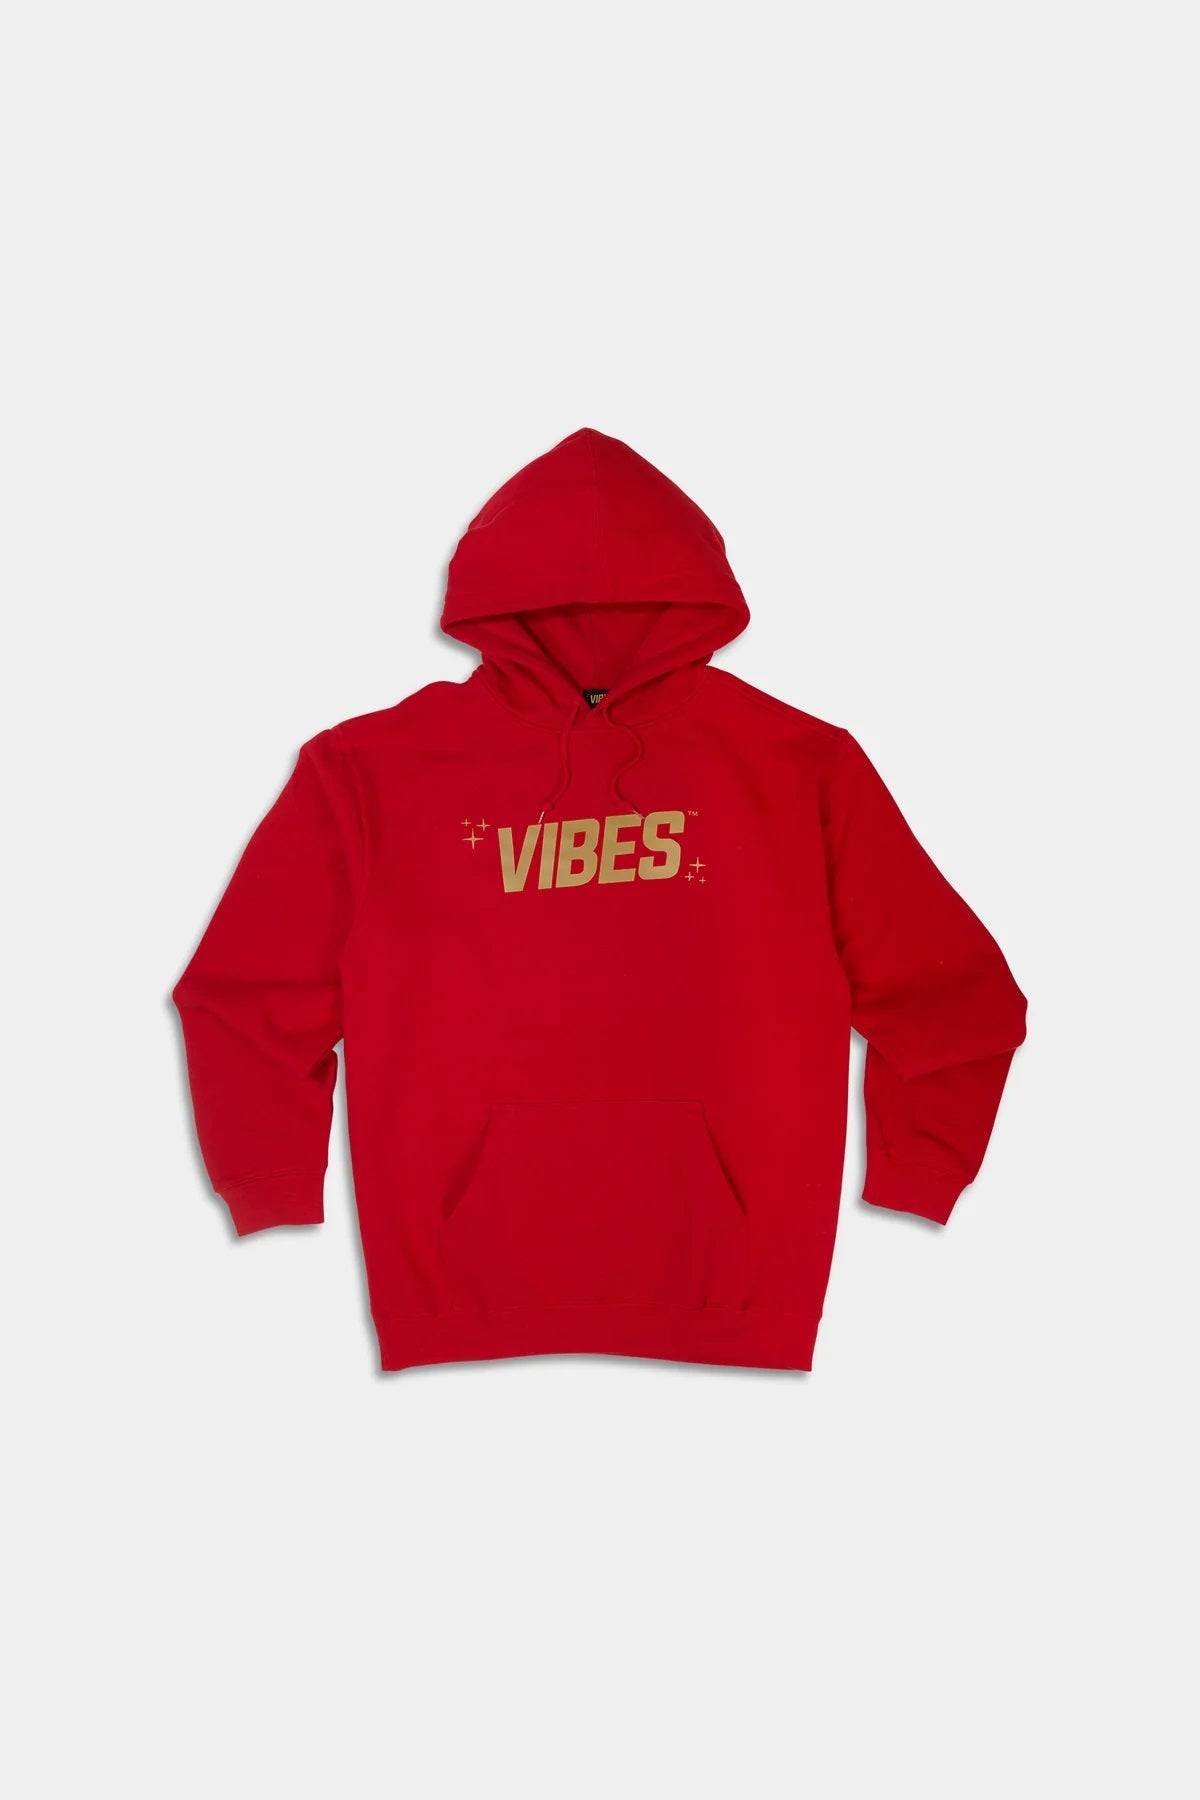 VIBES Red With Gold Logo Hoodie 2X-Large